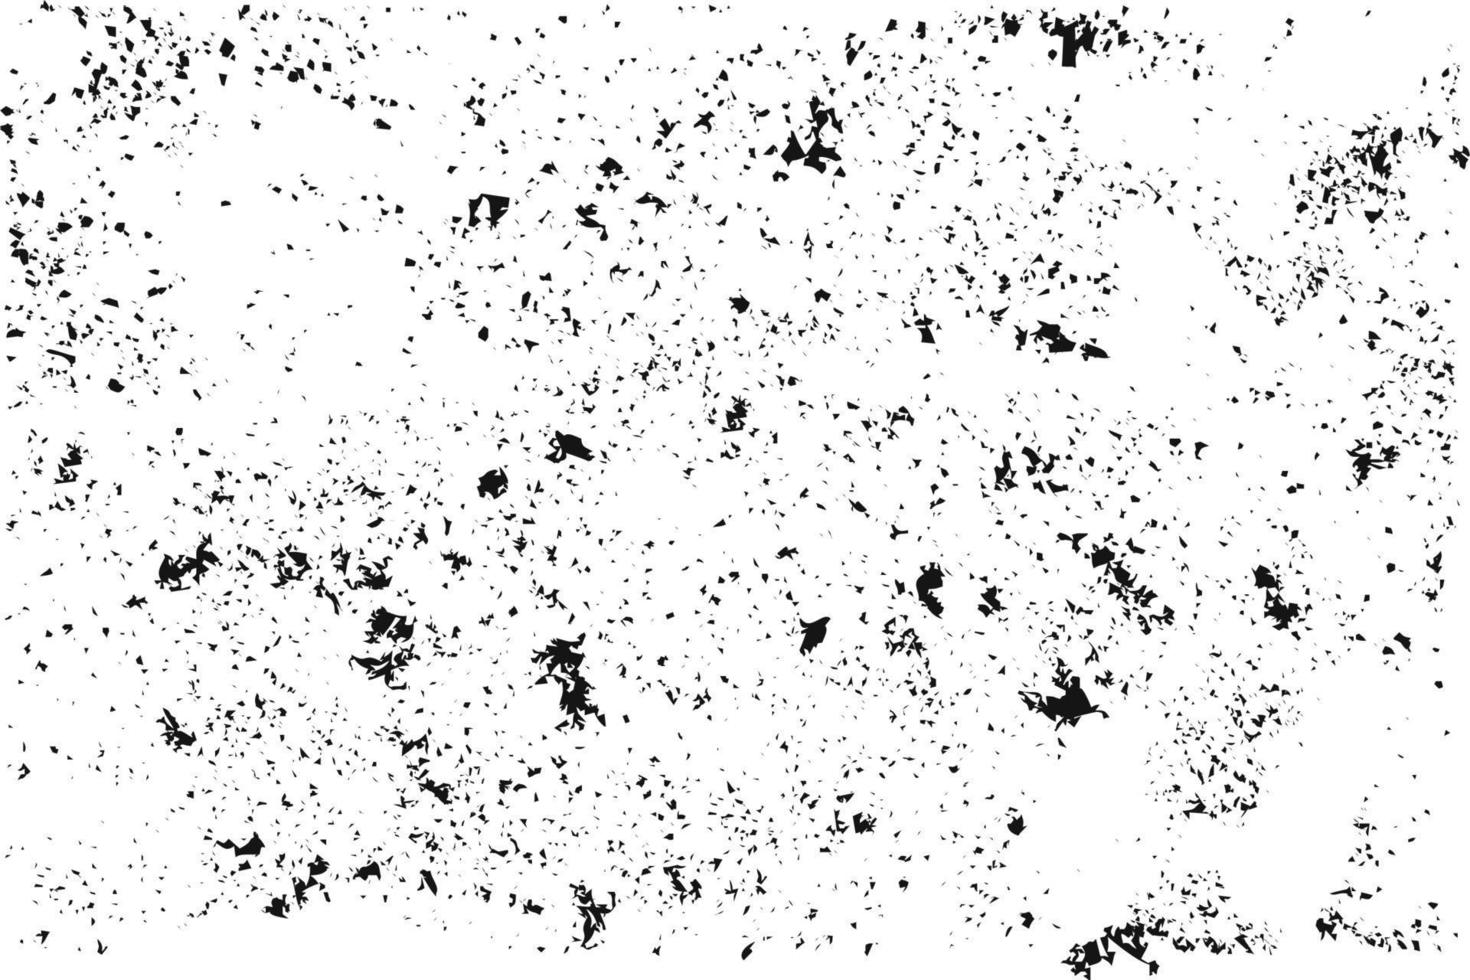 Abstract dust texture on a white background. Black and white dirt splatter texture vector. Dark dusty grunge effect texture for the background. Abstract grain texture vector on white background.